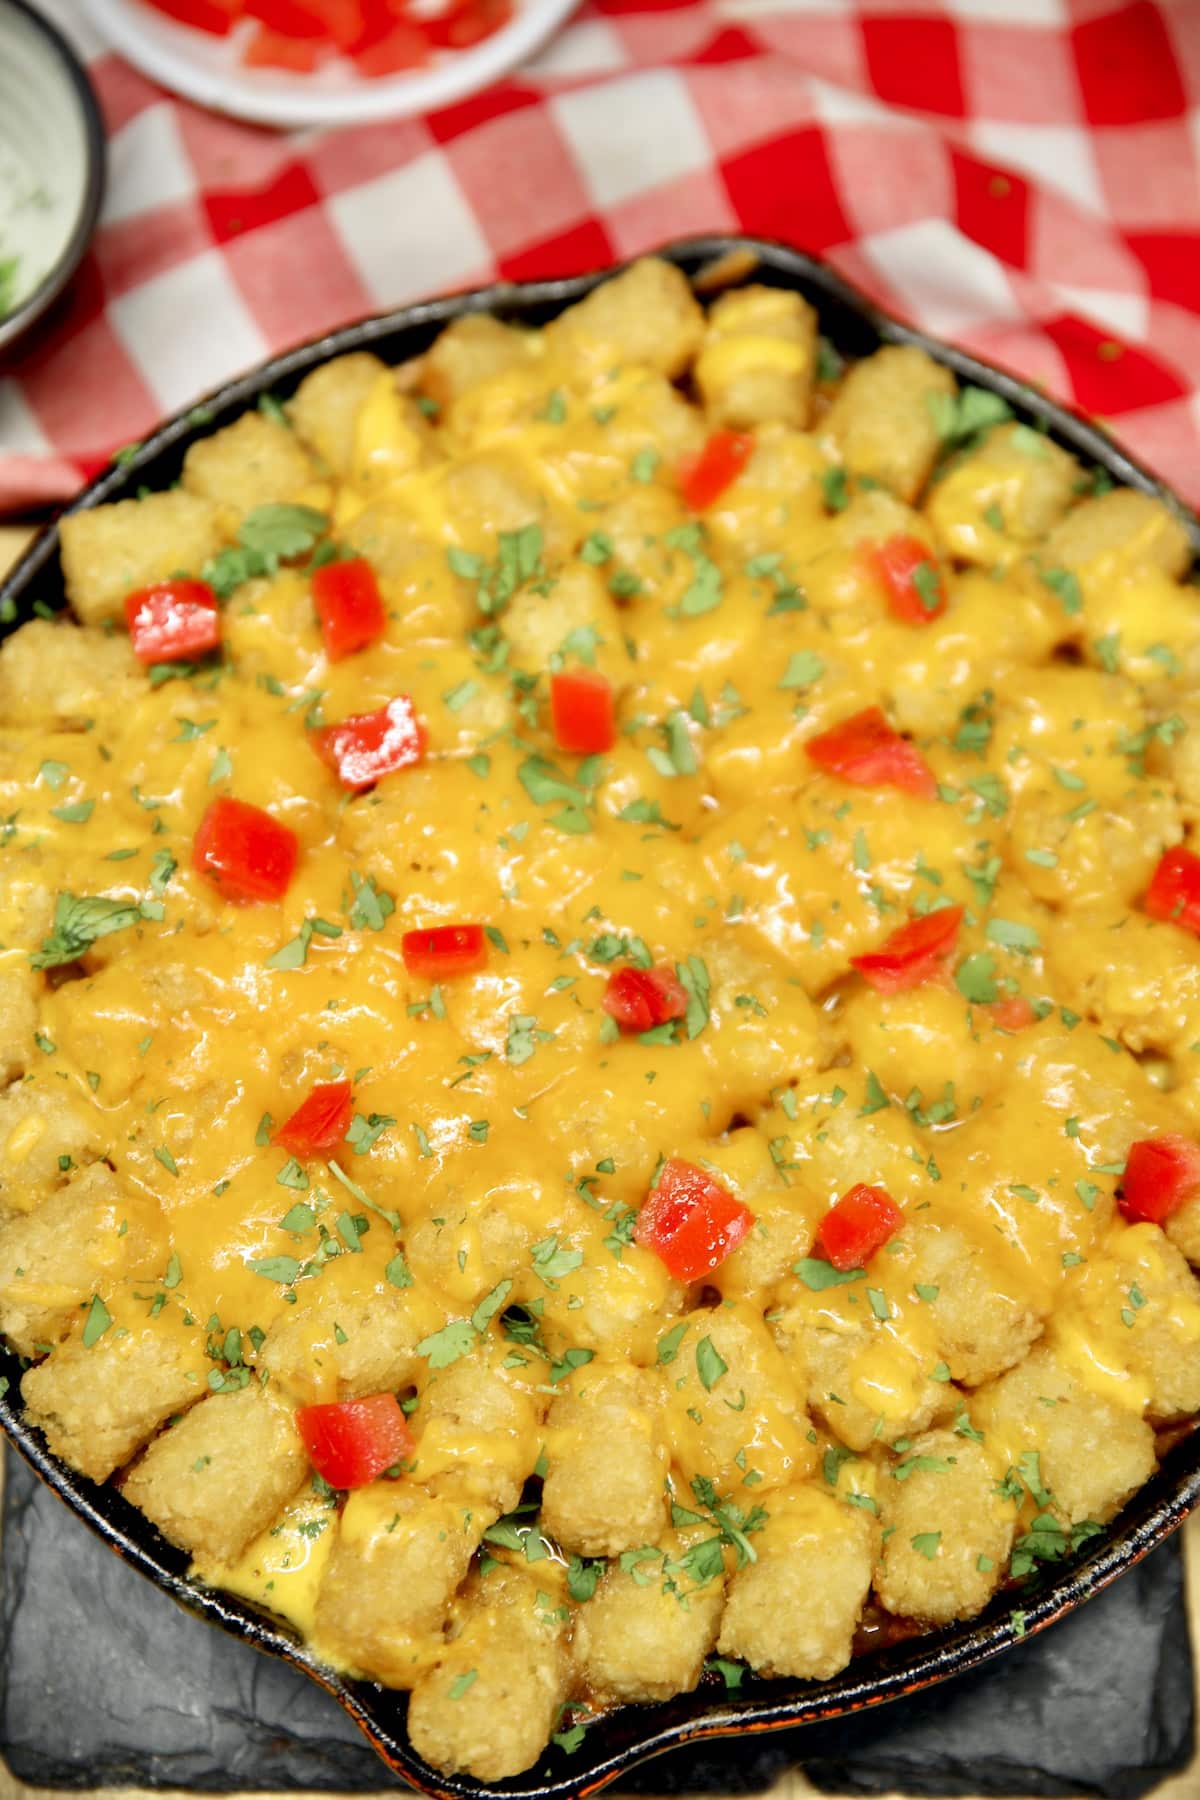 Tater tot casserole with diced tomatoes and cilantro.